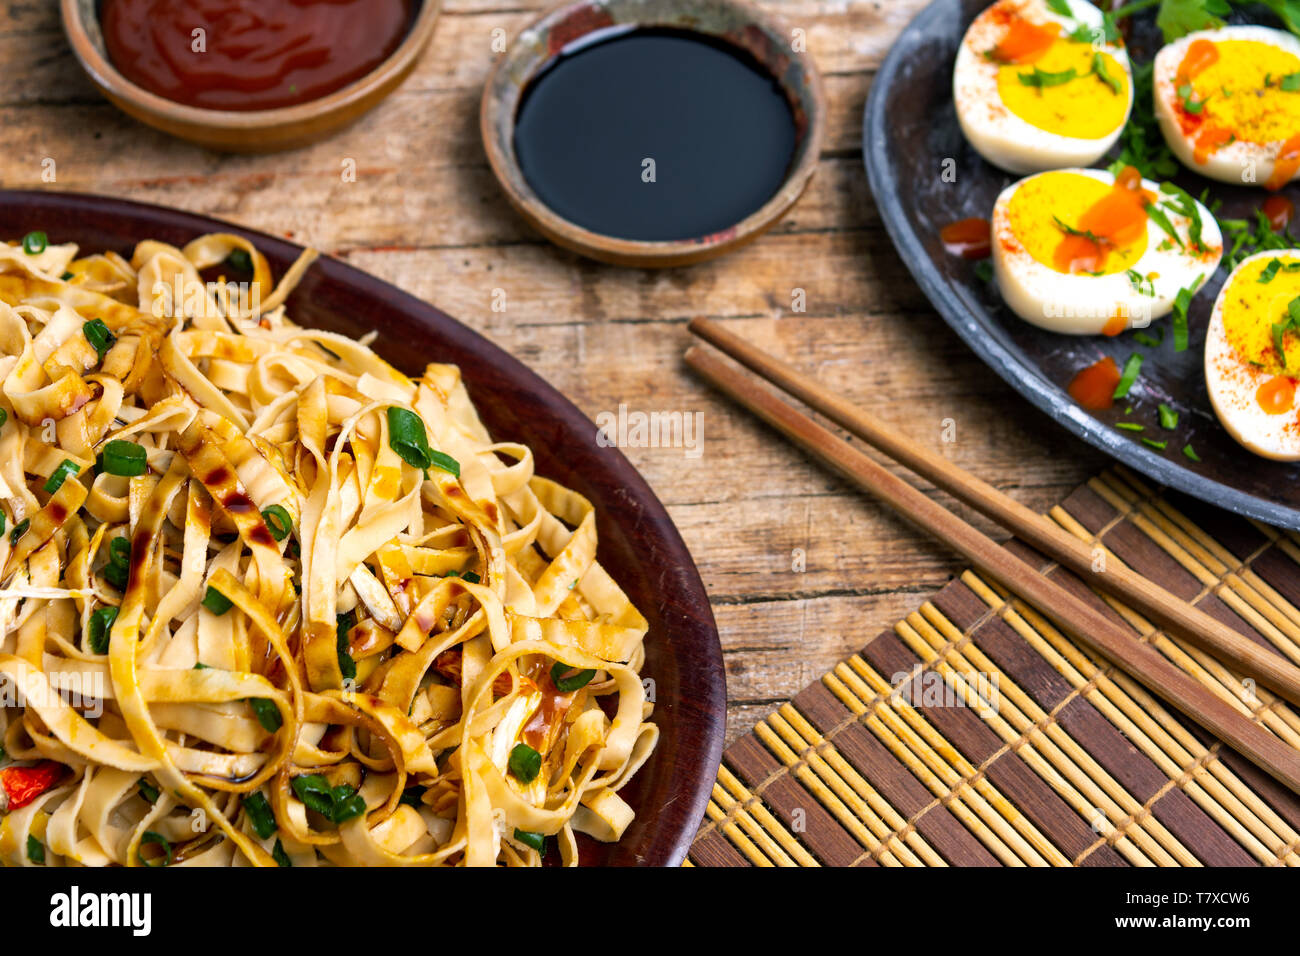 Vegetable noodles with soy sauce and ketchup tabletop view Stock Photo